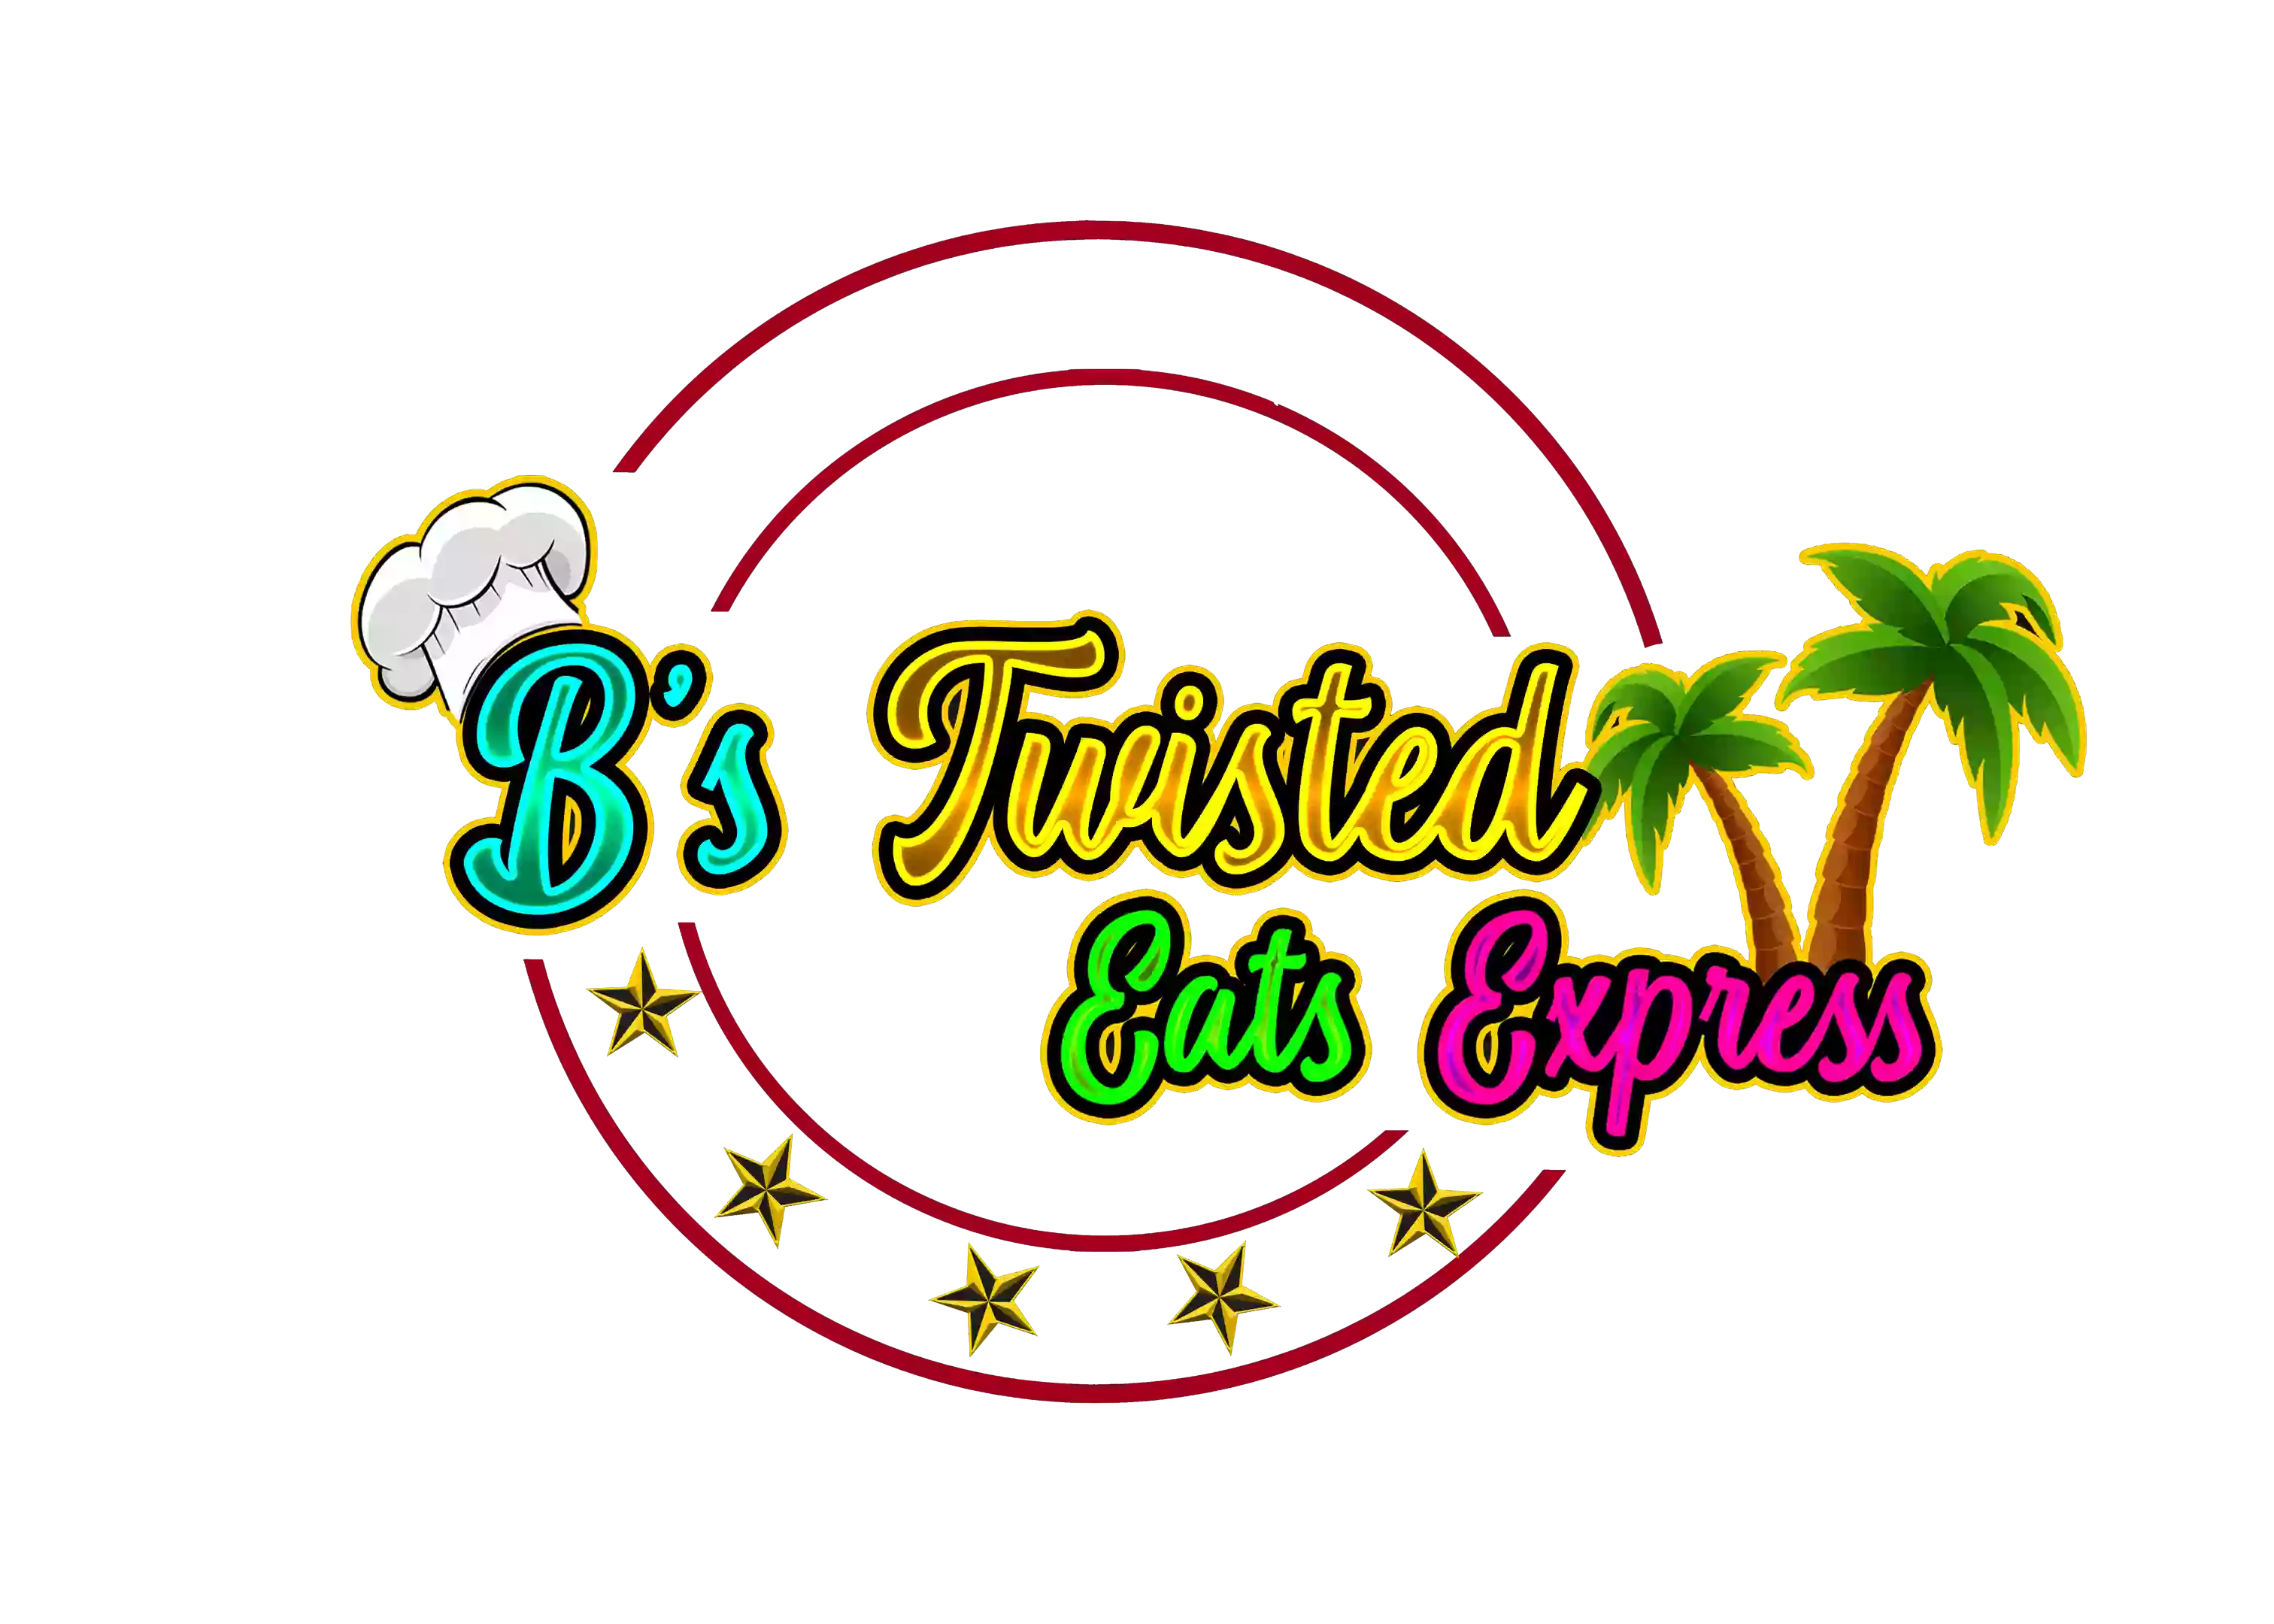 B’s Twisted Eats Express